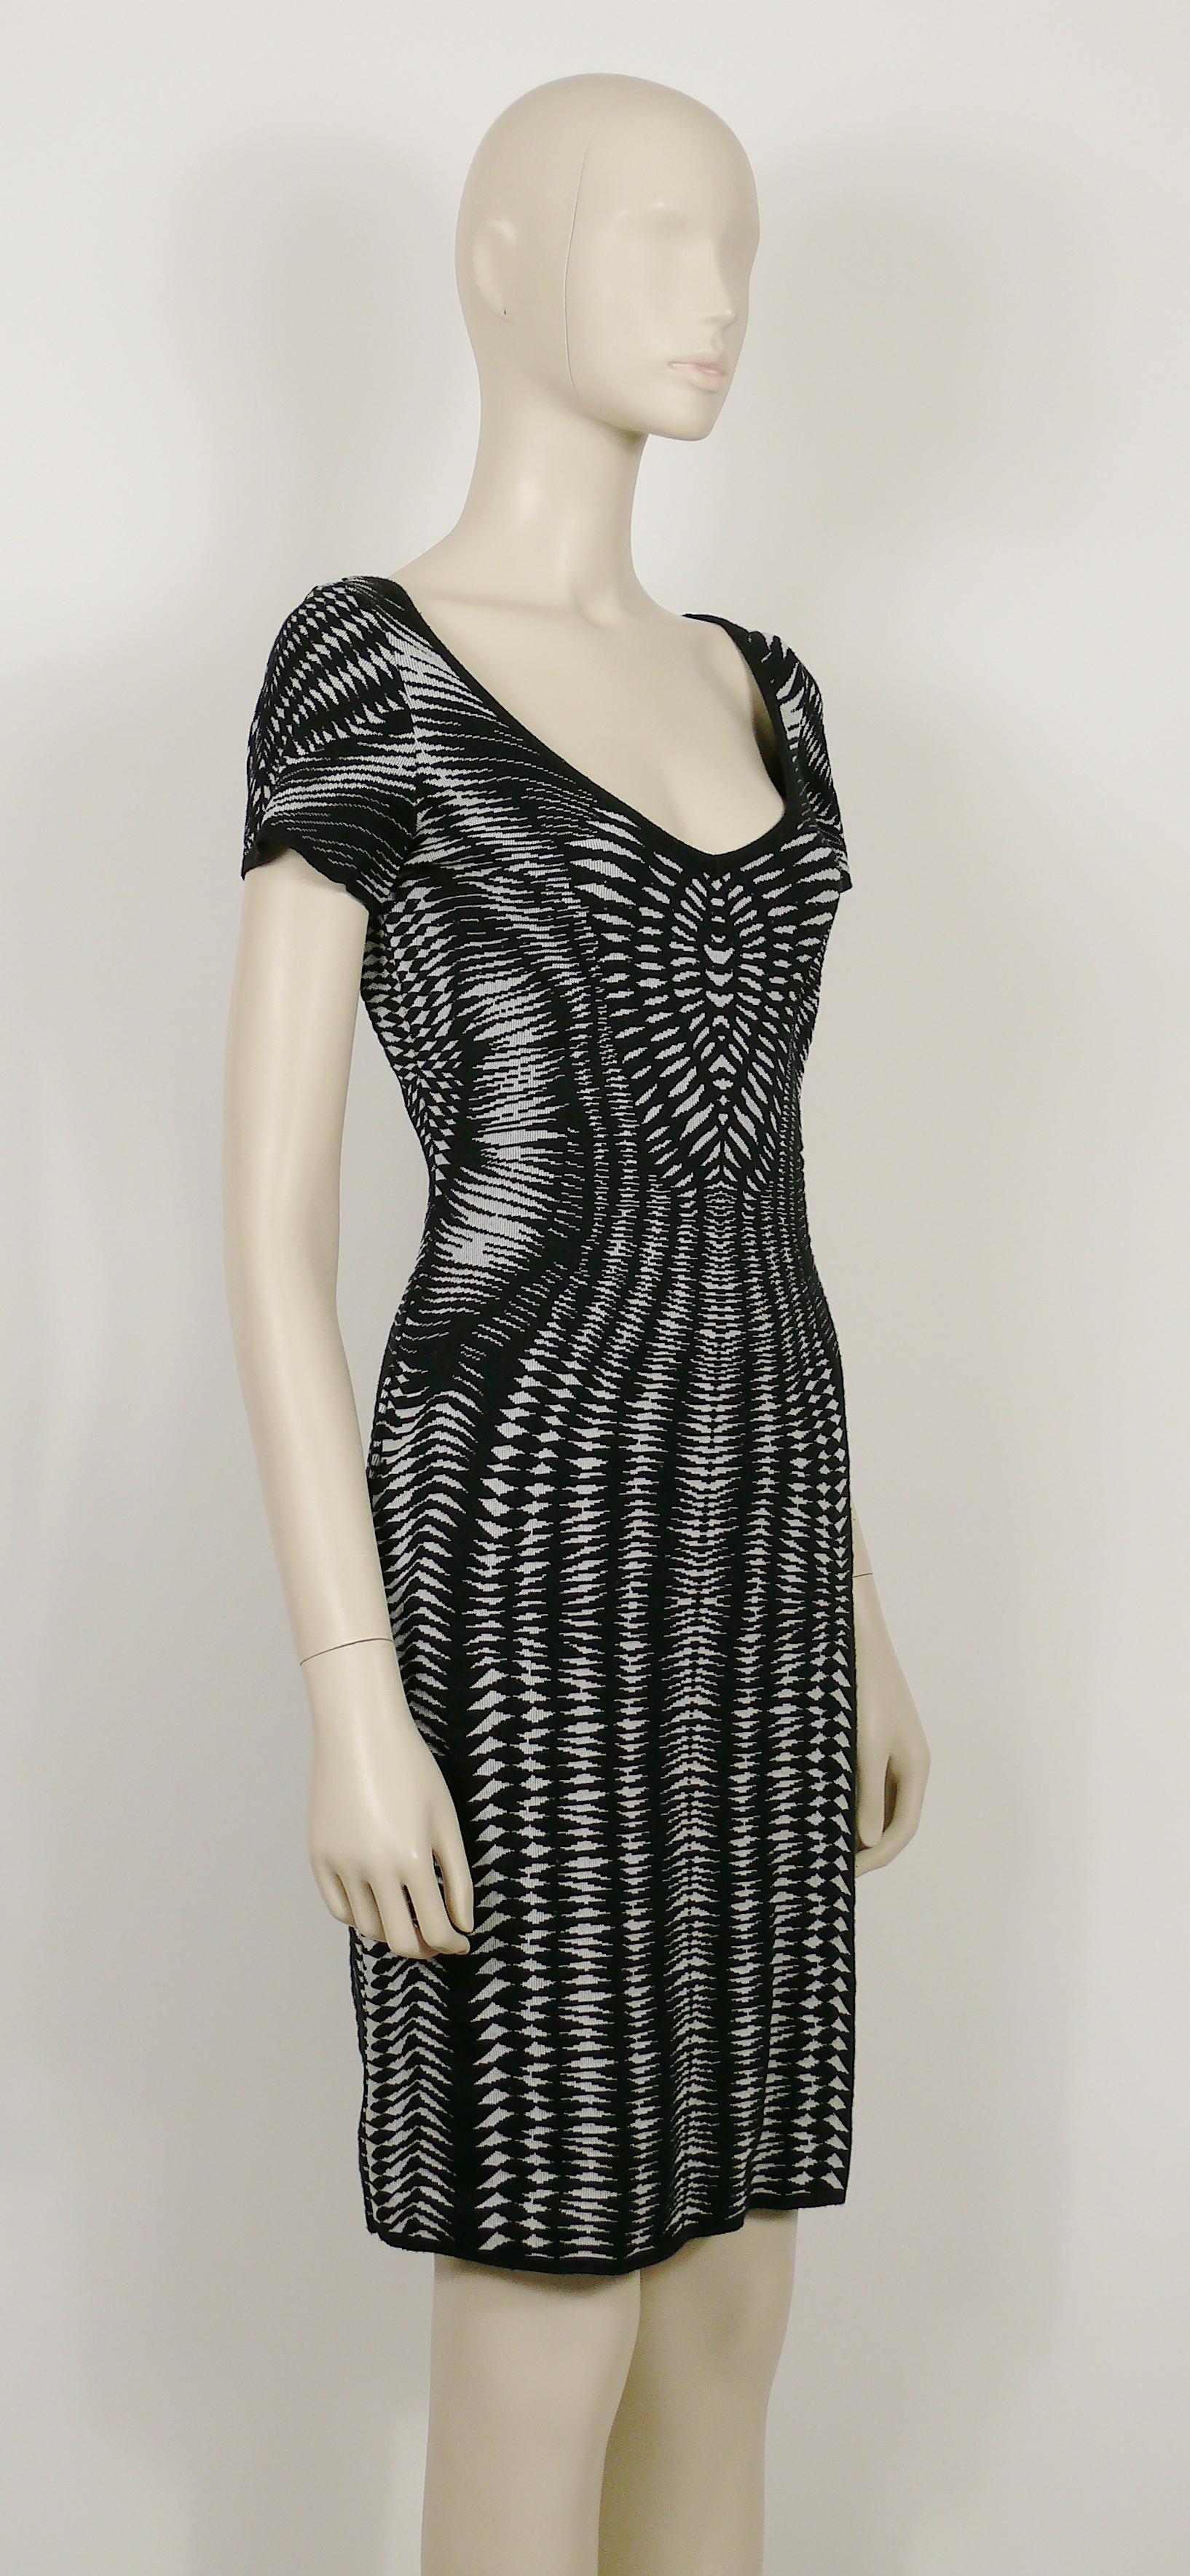 MUGLER vintage black and white kinetic knitted dress.

This dress features :
- Merinos wool blend with stretch.
- Above the knee length.
- Short sleeves.
- Slips on.
- No lining.

Label reads MUGLER.
Made in Italy.

Size tag reads : M.
Please check